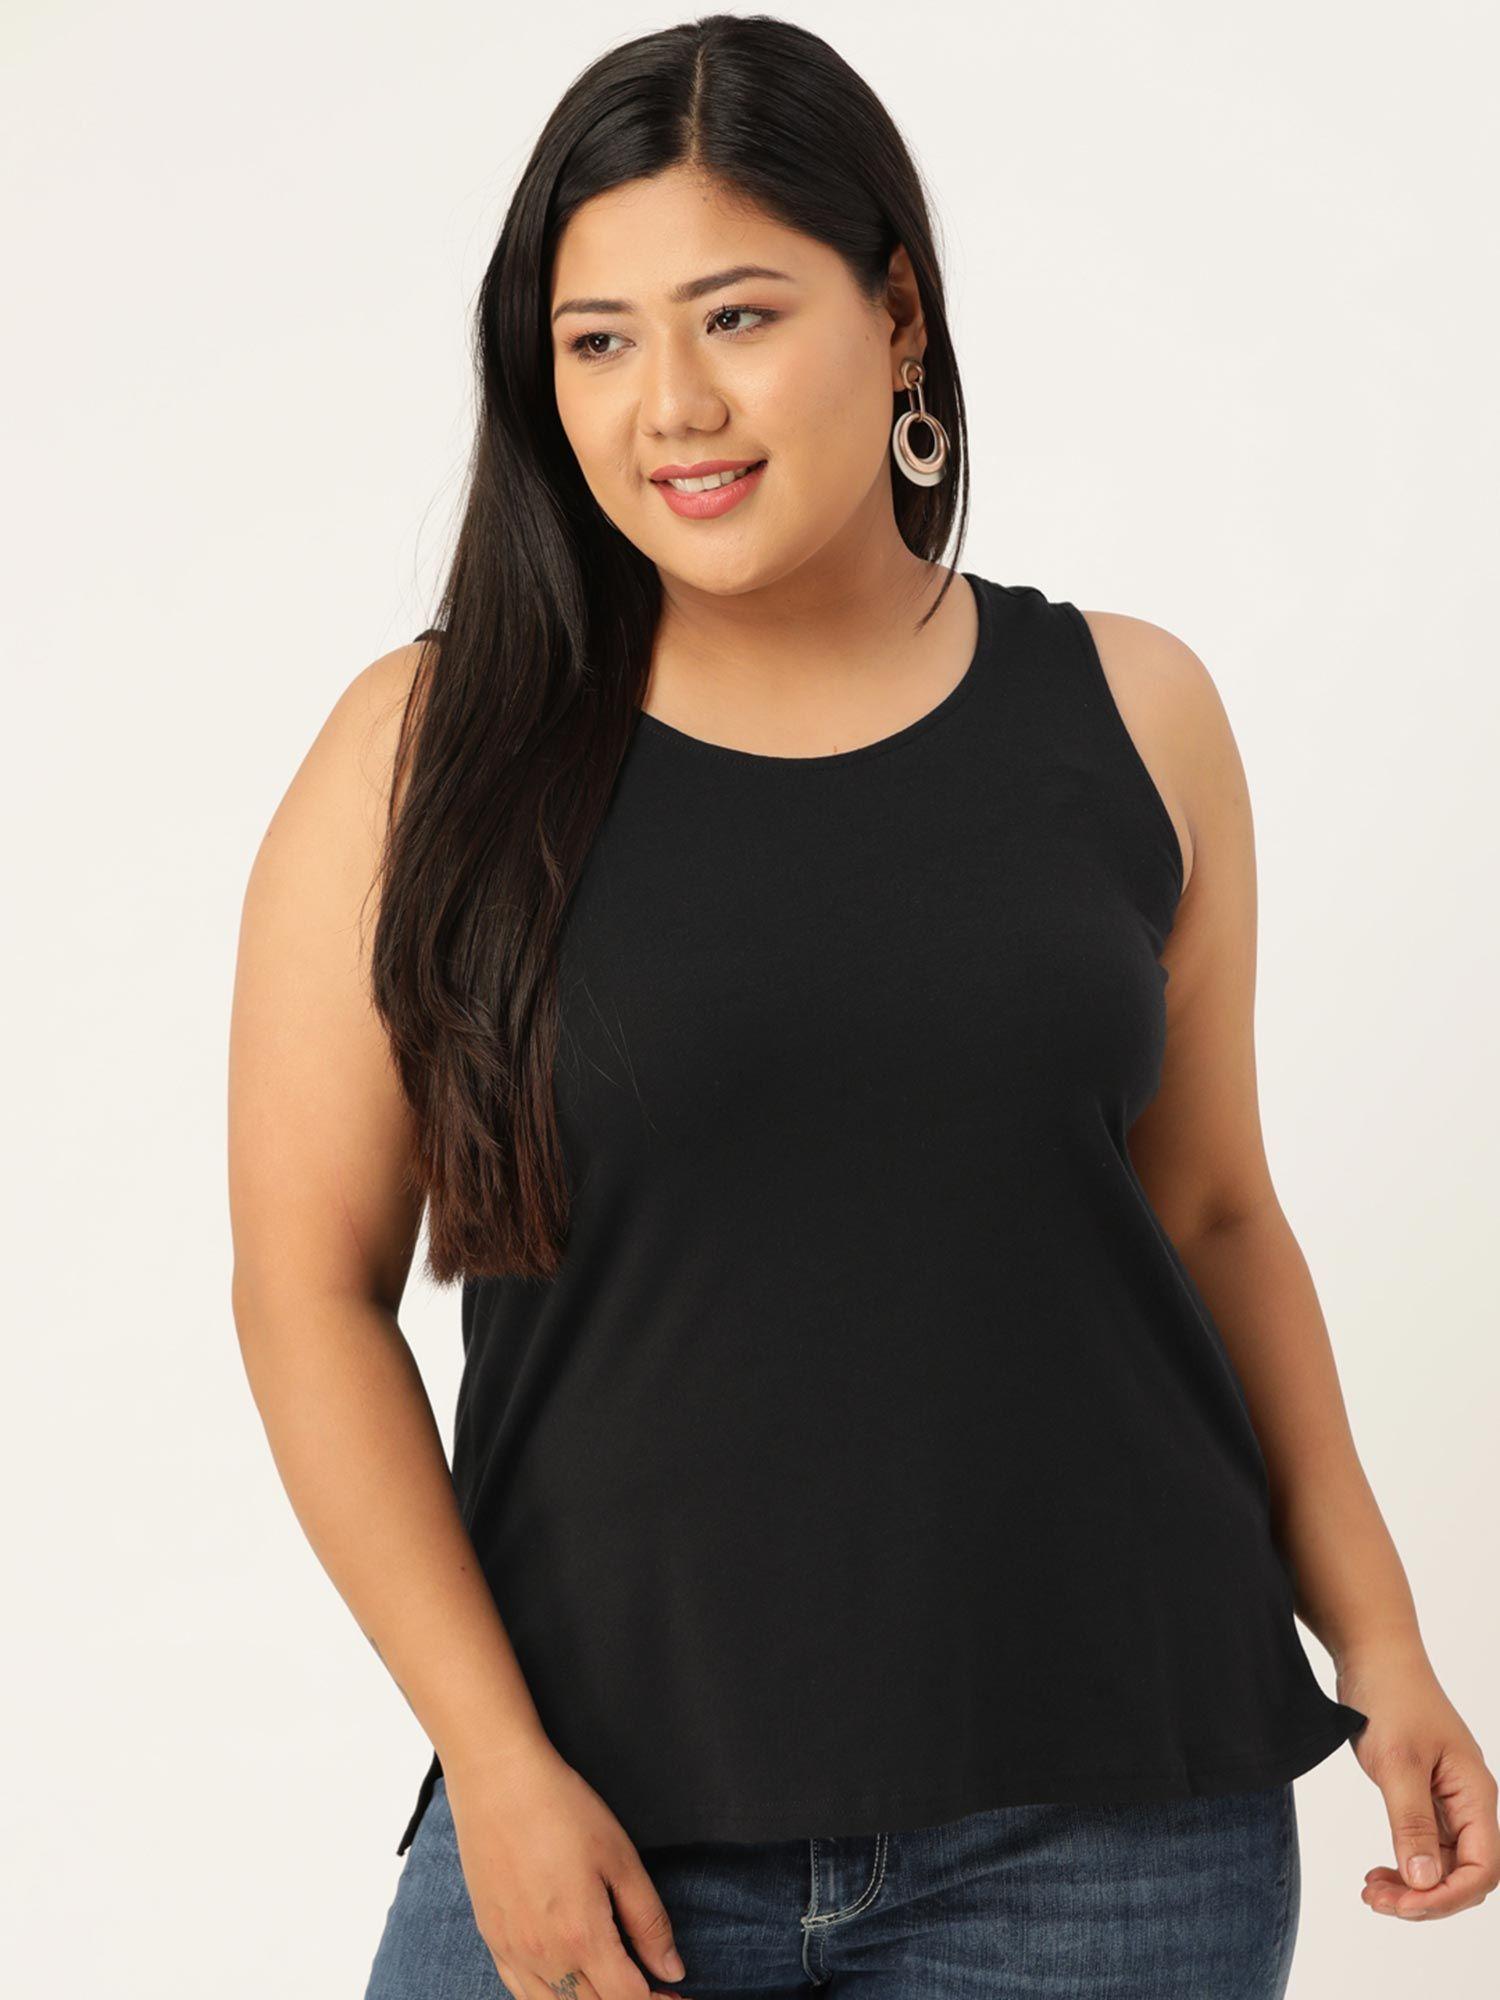 Plus Size Womens Black Solid Camisole Top